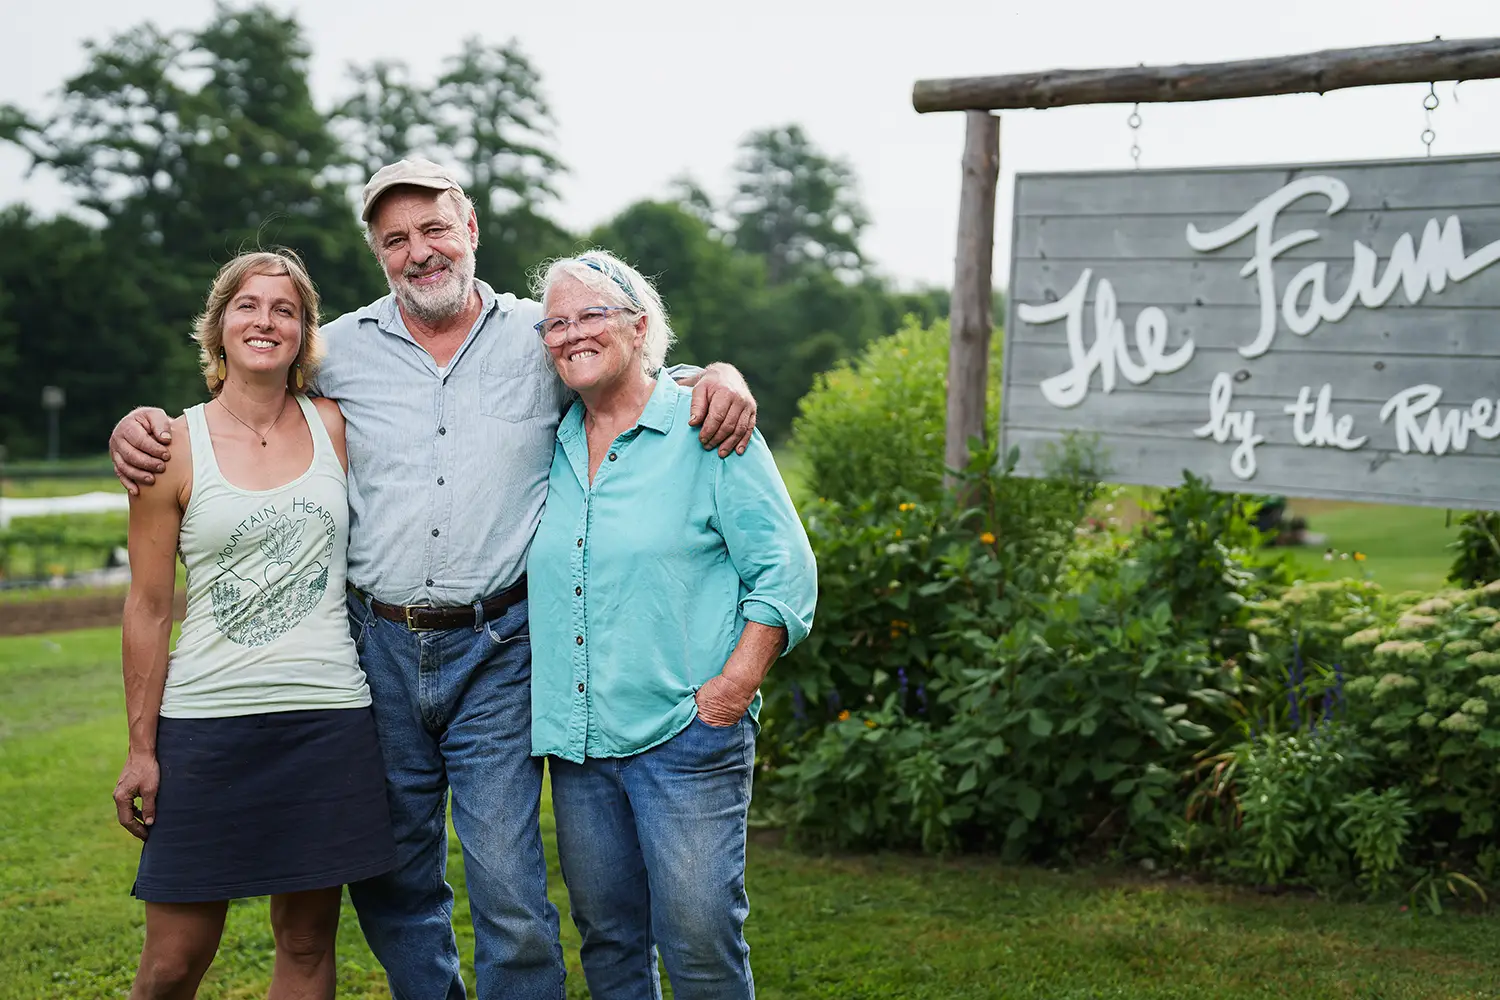 Bill and Eve Klotz with Joanne Ducas posing in front of farm sign